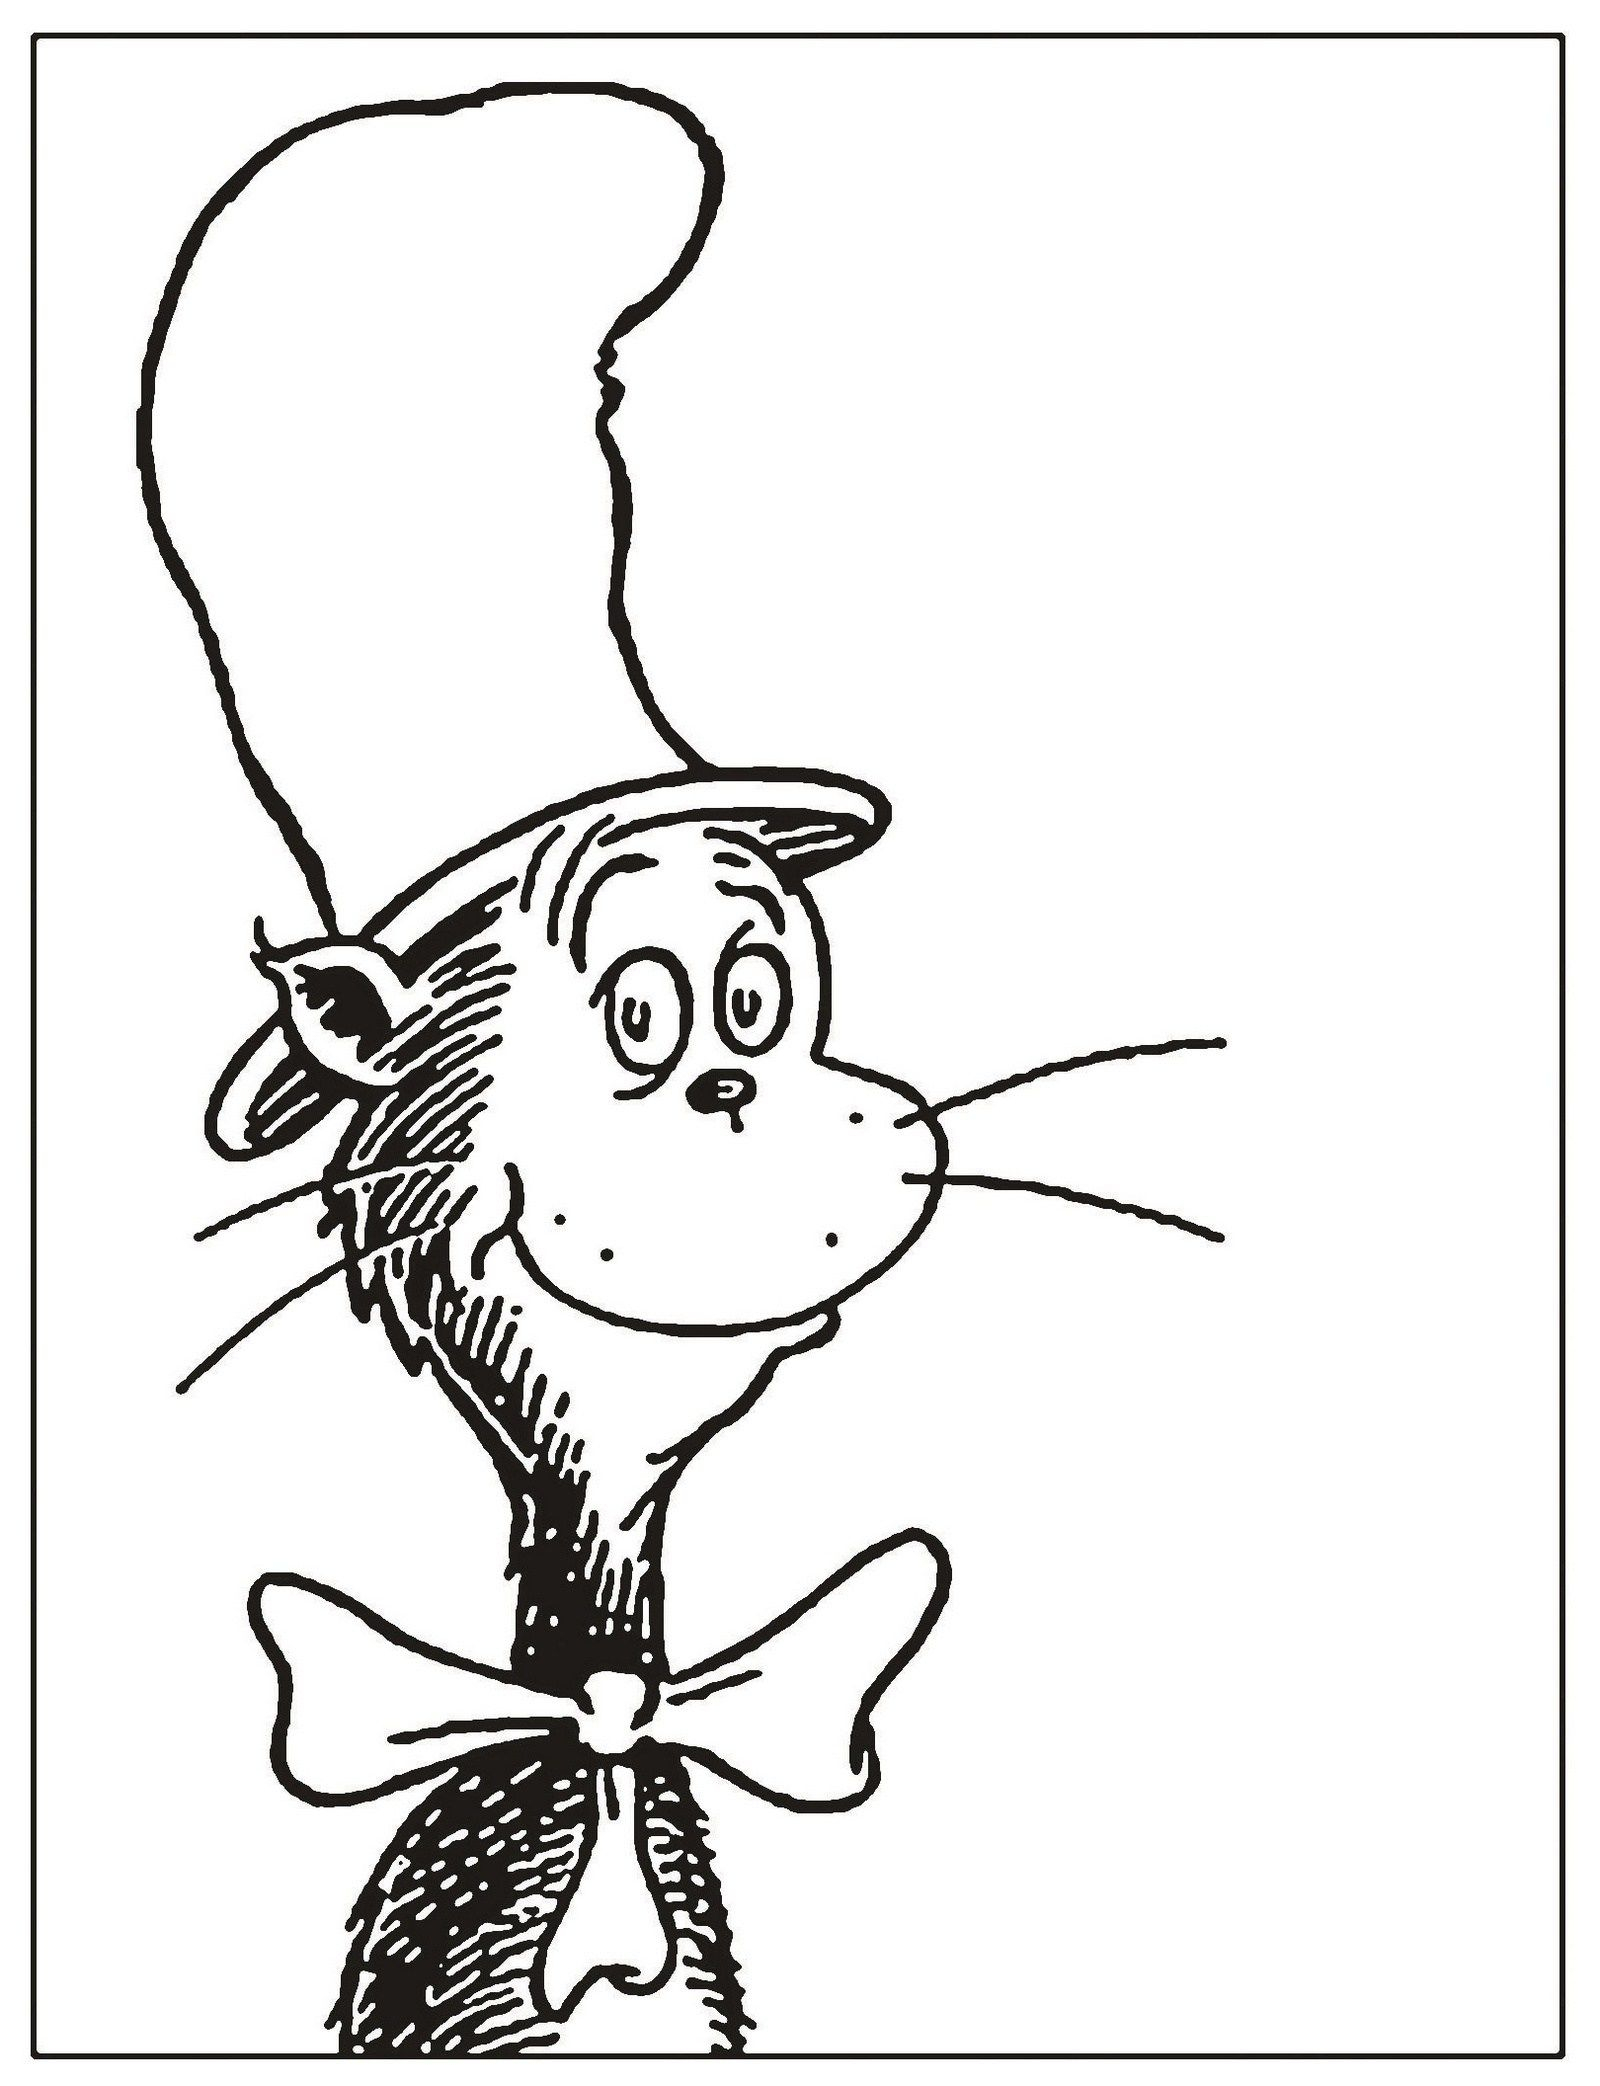 Cat In The Hat Coloring Page Coloring Pages Cat In The Hat Coloring Clip Art Picture Dr Seuess